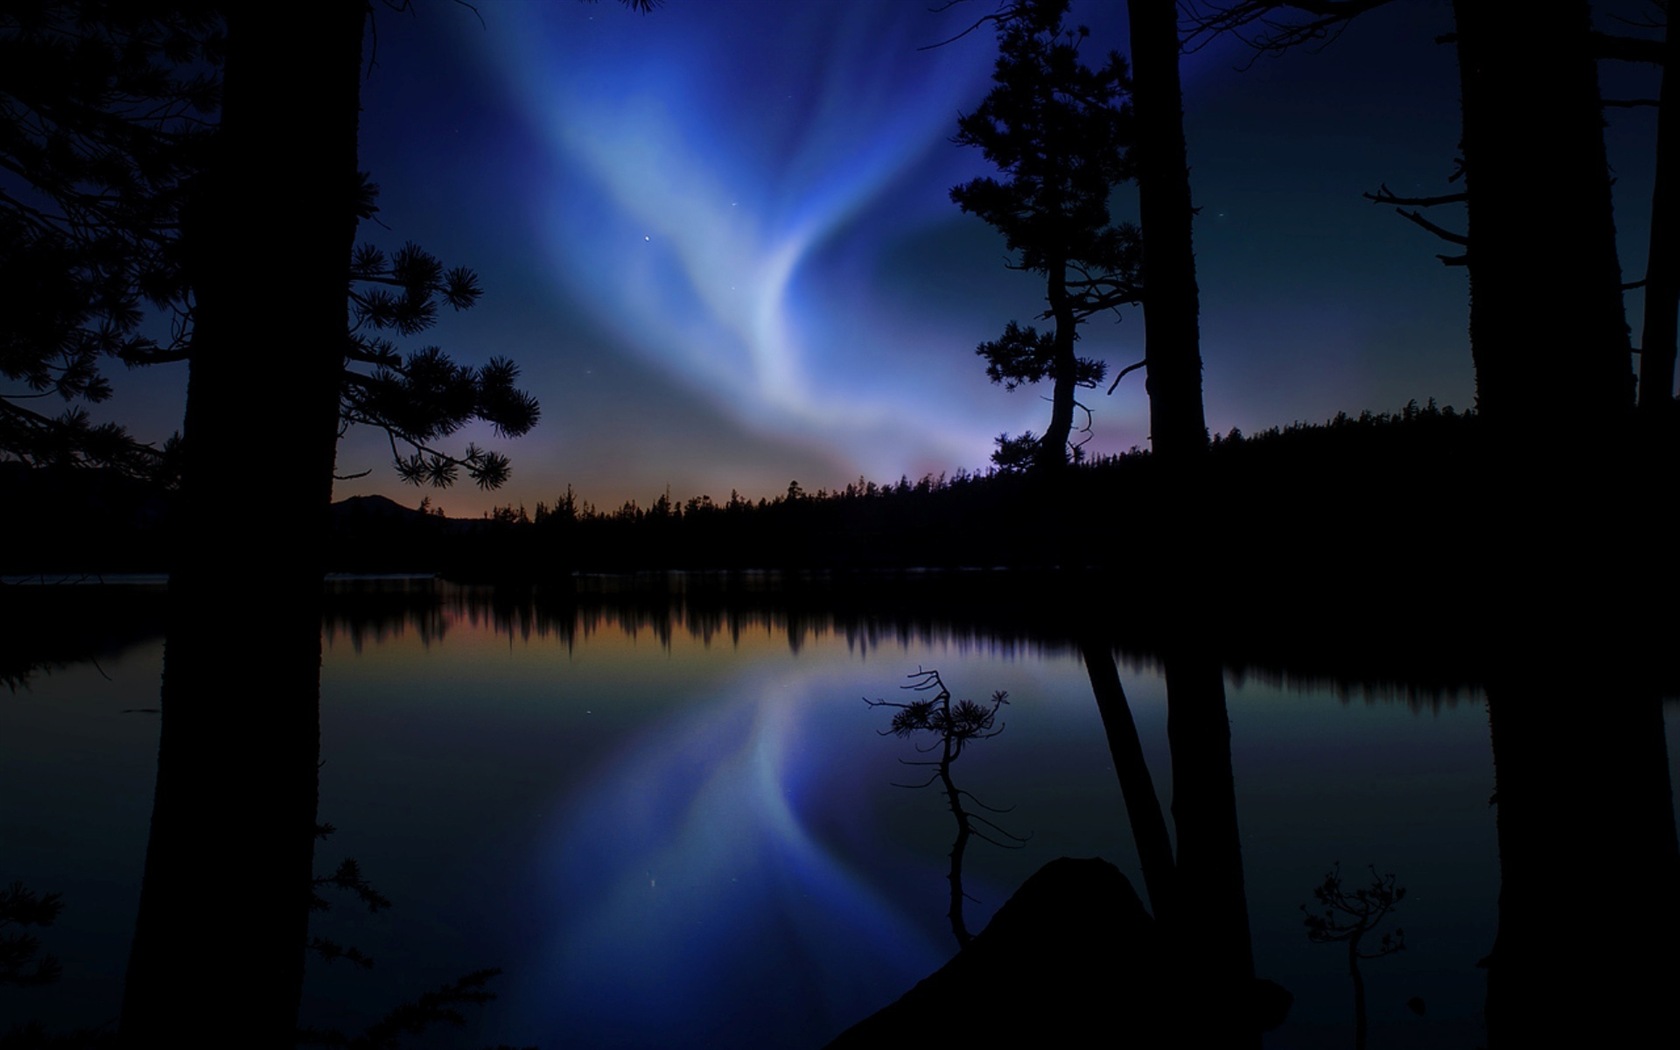 Natural wonders of the Northern Lights HD Wallpaper (1) #11 - 1680x1050